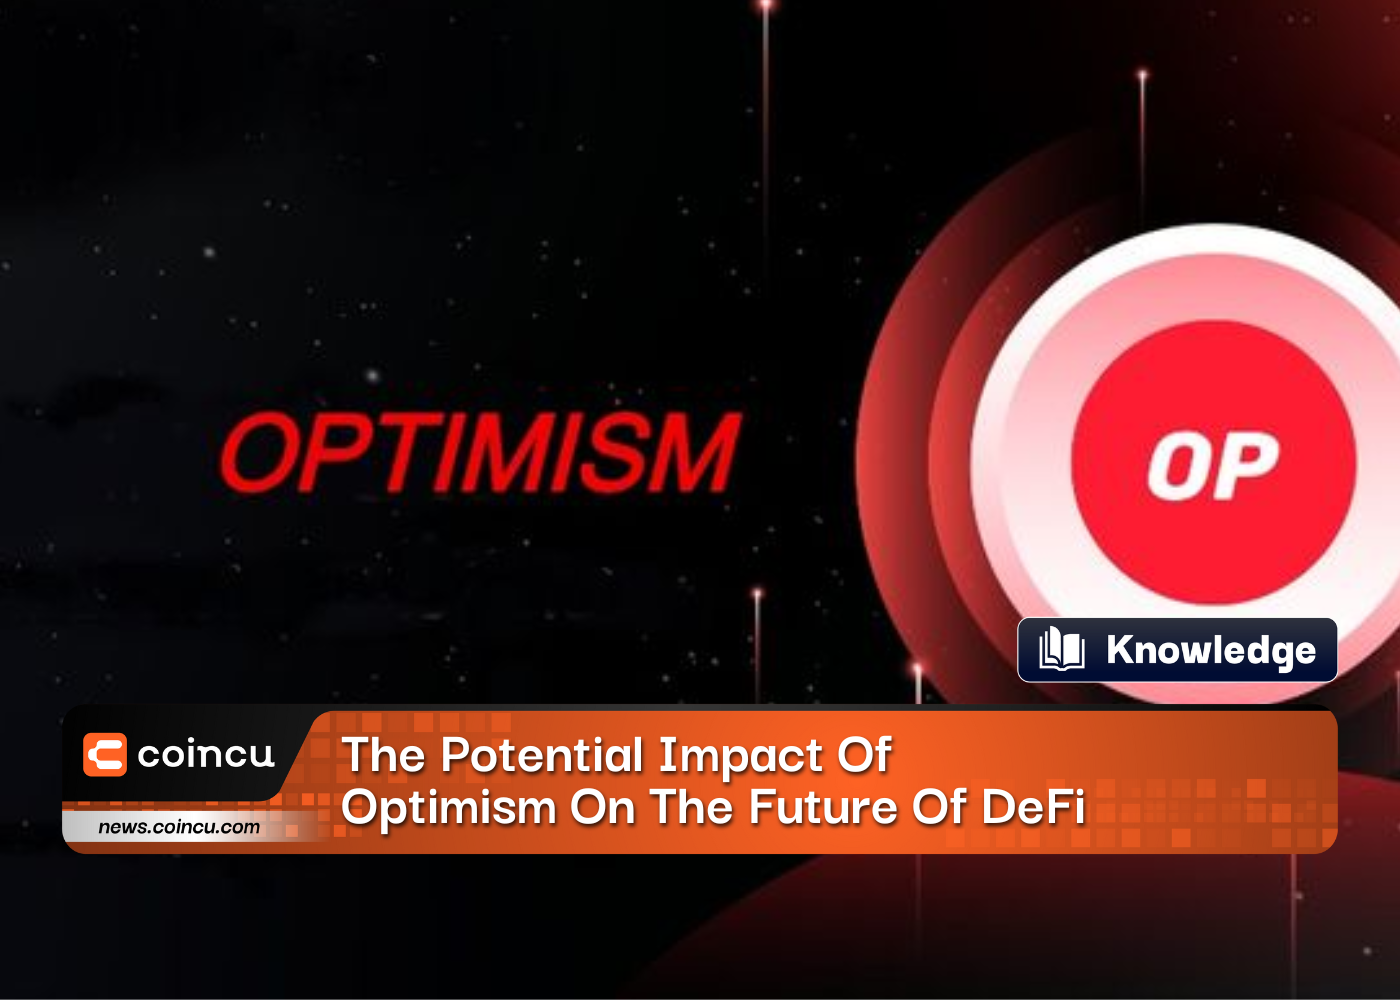 The Potential Impact Of Optimism On The Future Of DeFi